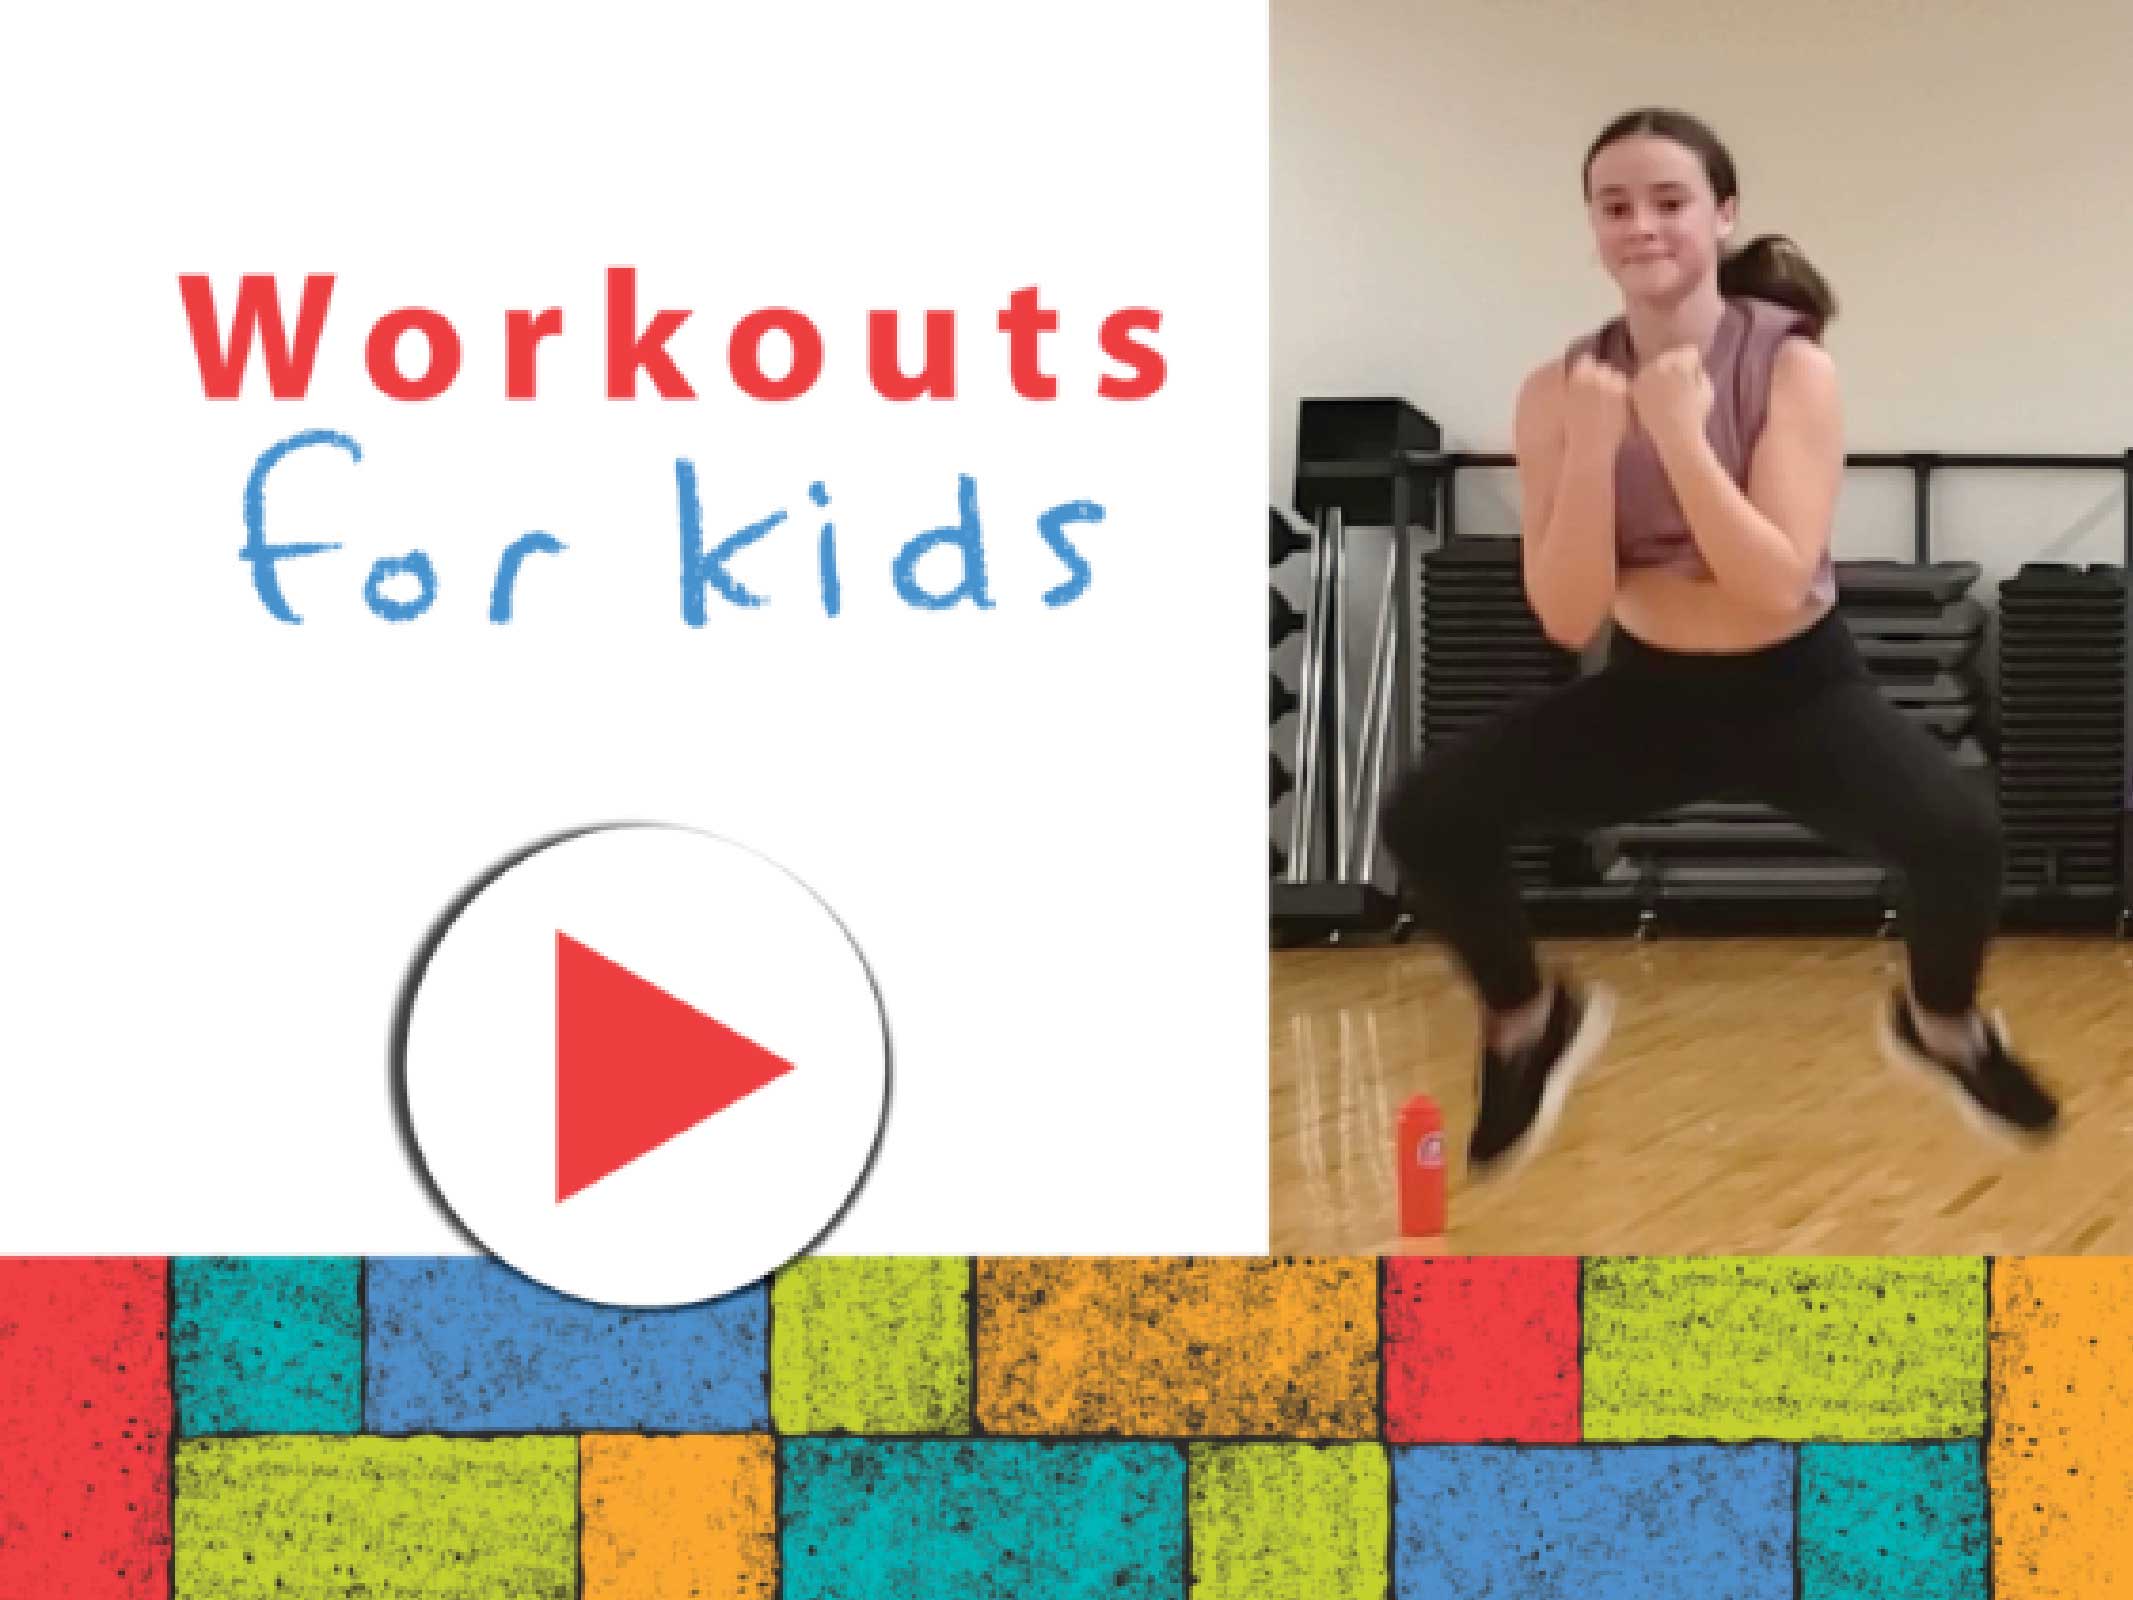 Workouts for Kids